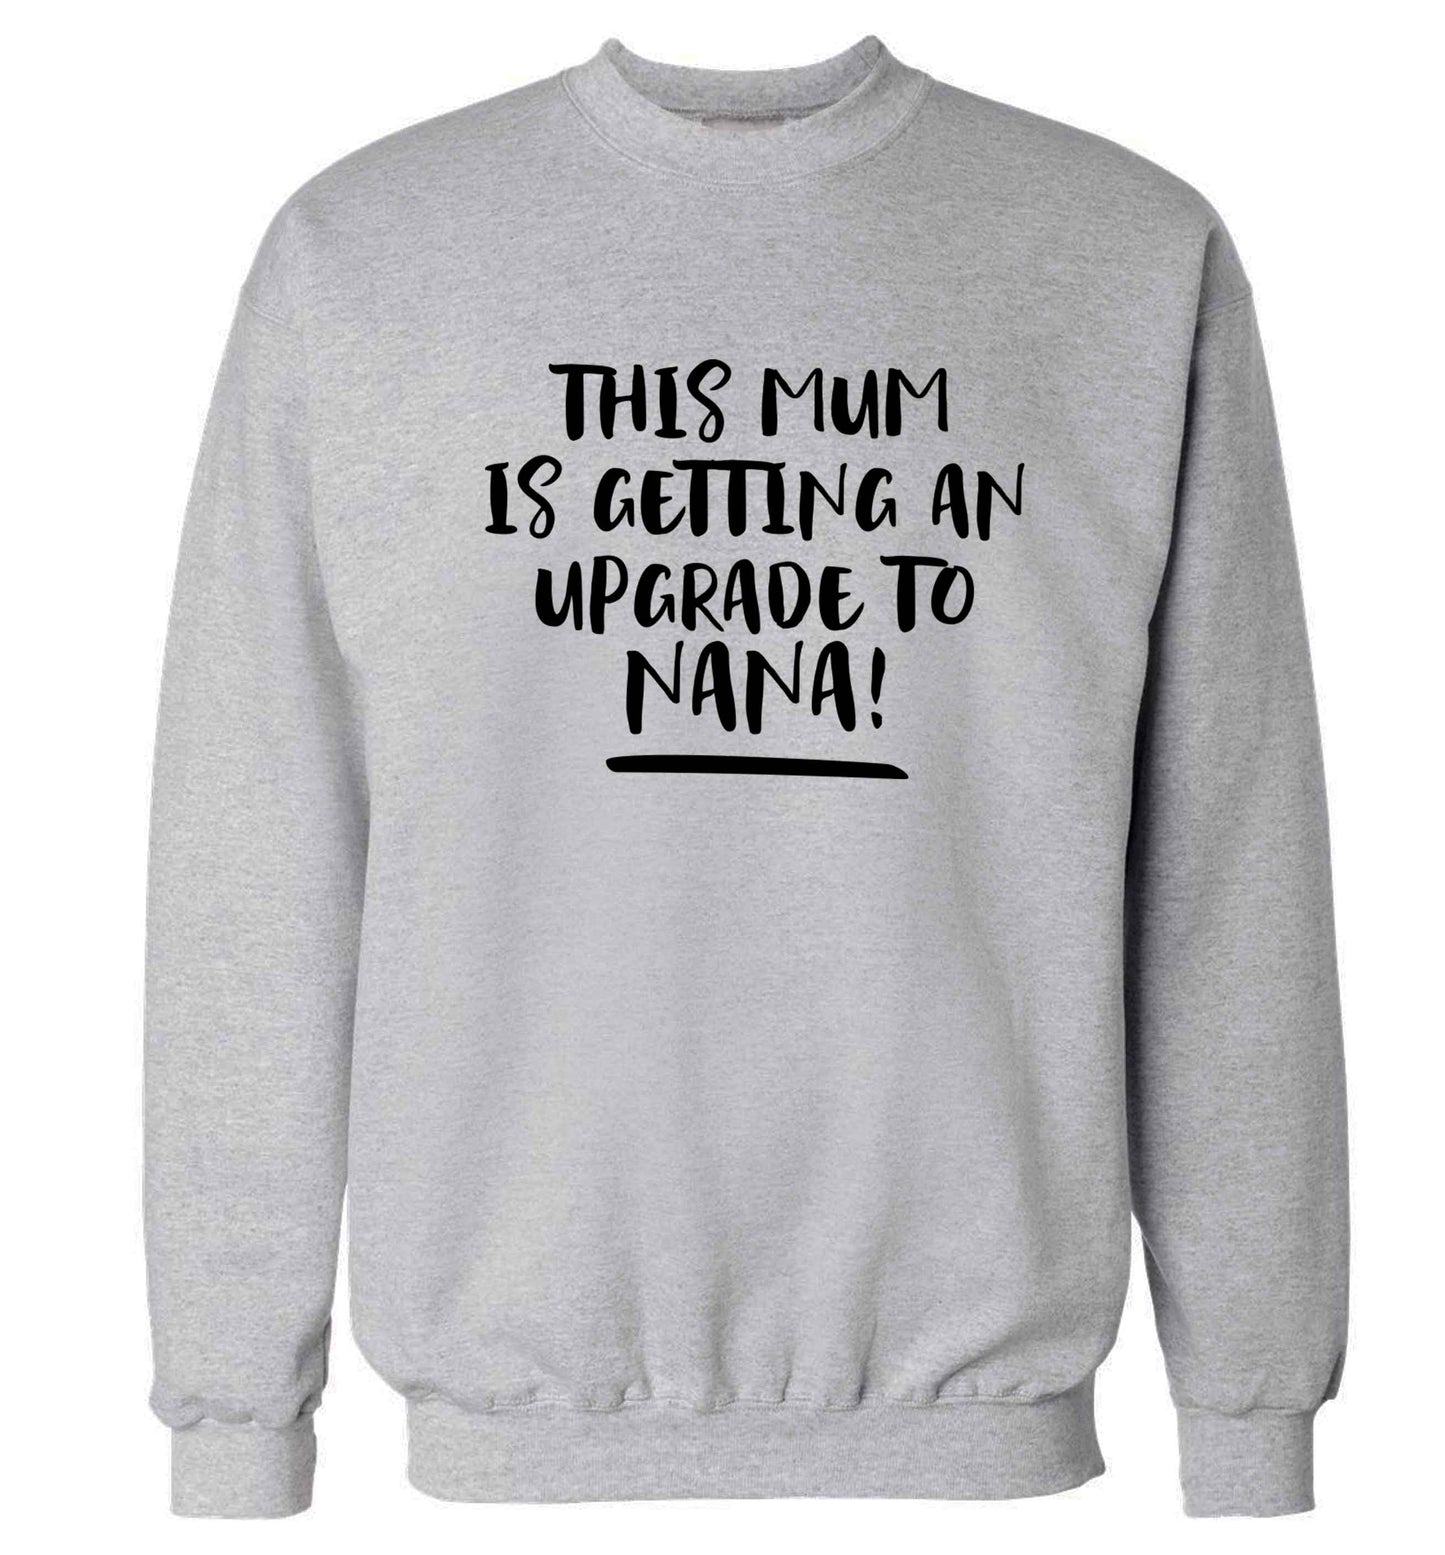 This mum is getting an upgrade to nana! Adult's unisex grey Sweater 2XL